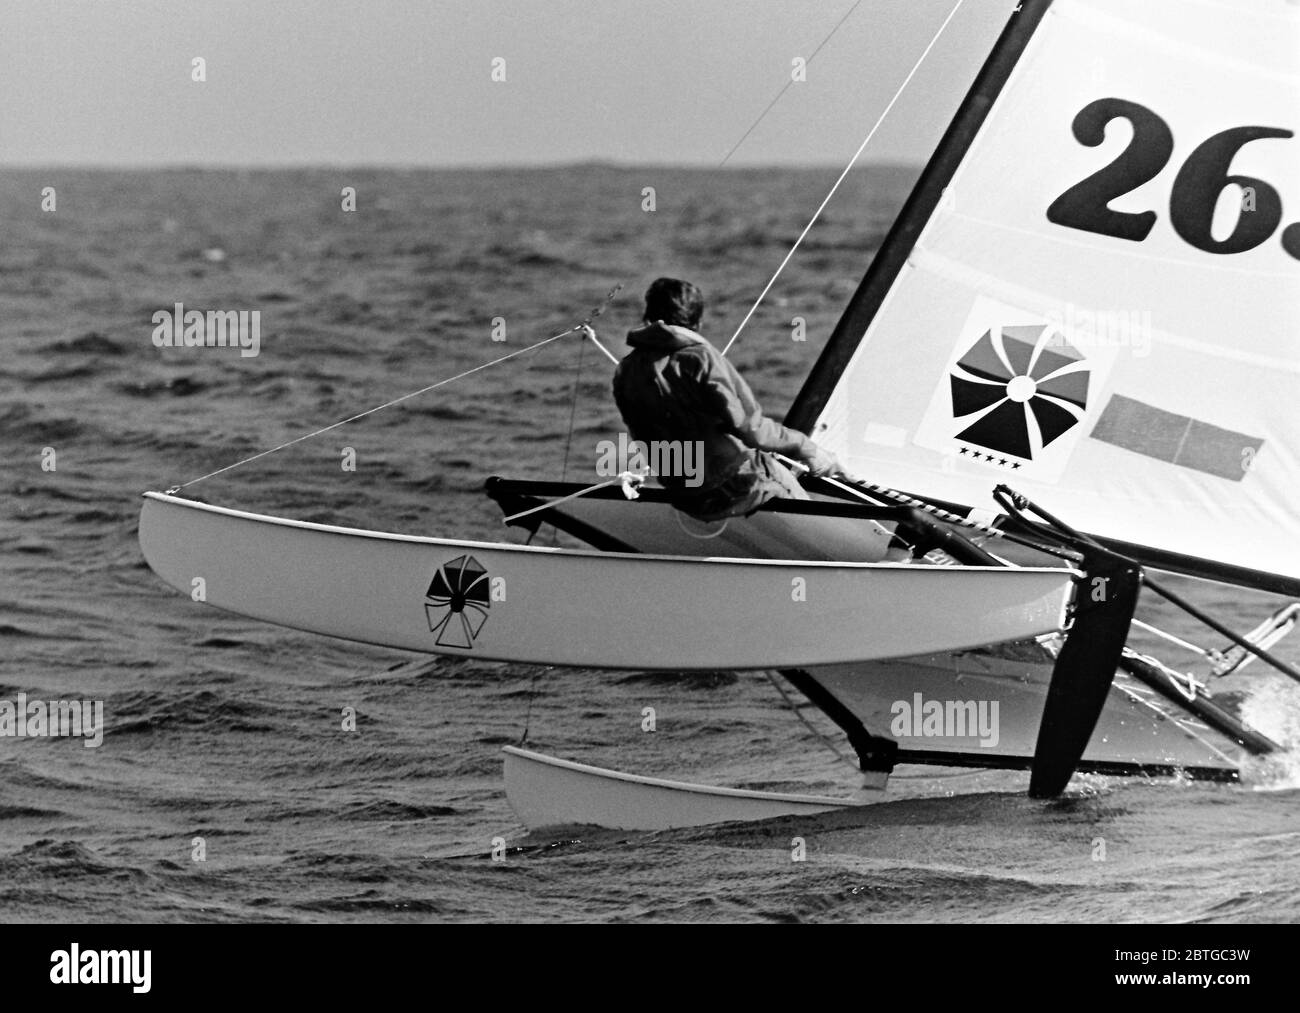 AJAXNETPHOTO. 1977. LAS SALINAS BAY, LANZAROTE, SPAIN. - A COMPETITOR RACING IN A STIFF BREEZE AND CHOPPY WATERS IN THE HOBIE CAT 14 WORLD CHAMPIONSHIPS. PHOTO:JONATHAN EASTLAND/AJAX REF:7726091 87 Stock Photo